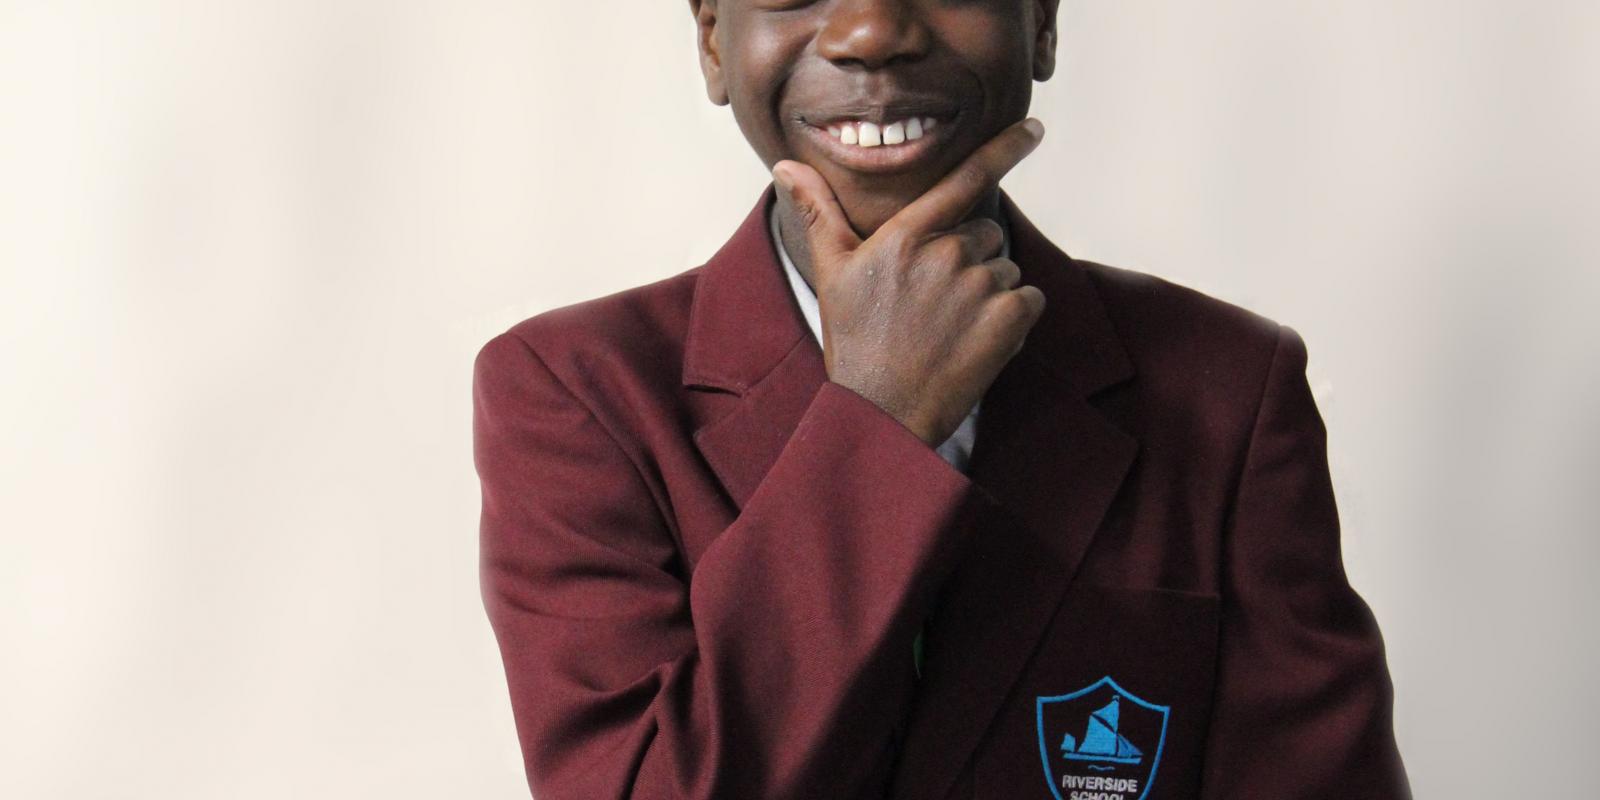 school boy smiling cheekily with hand up to chin